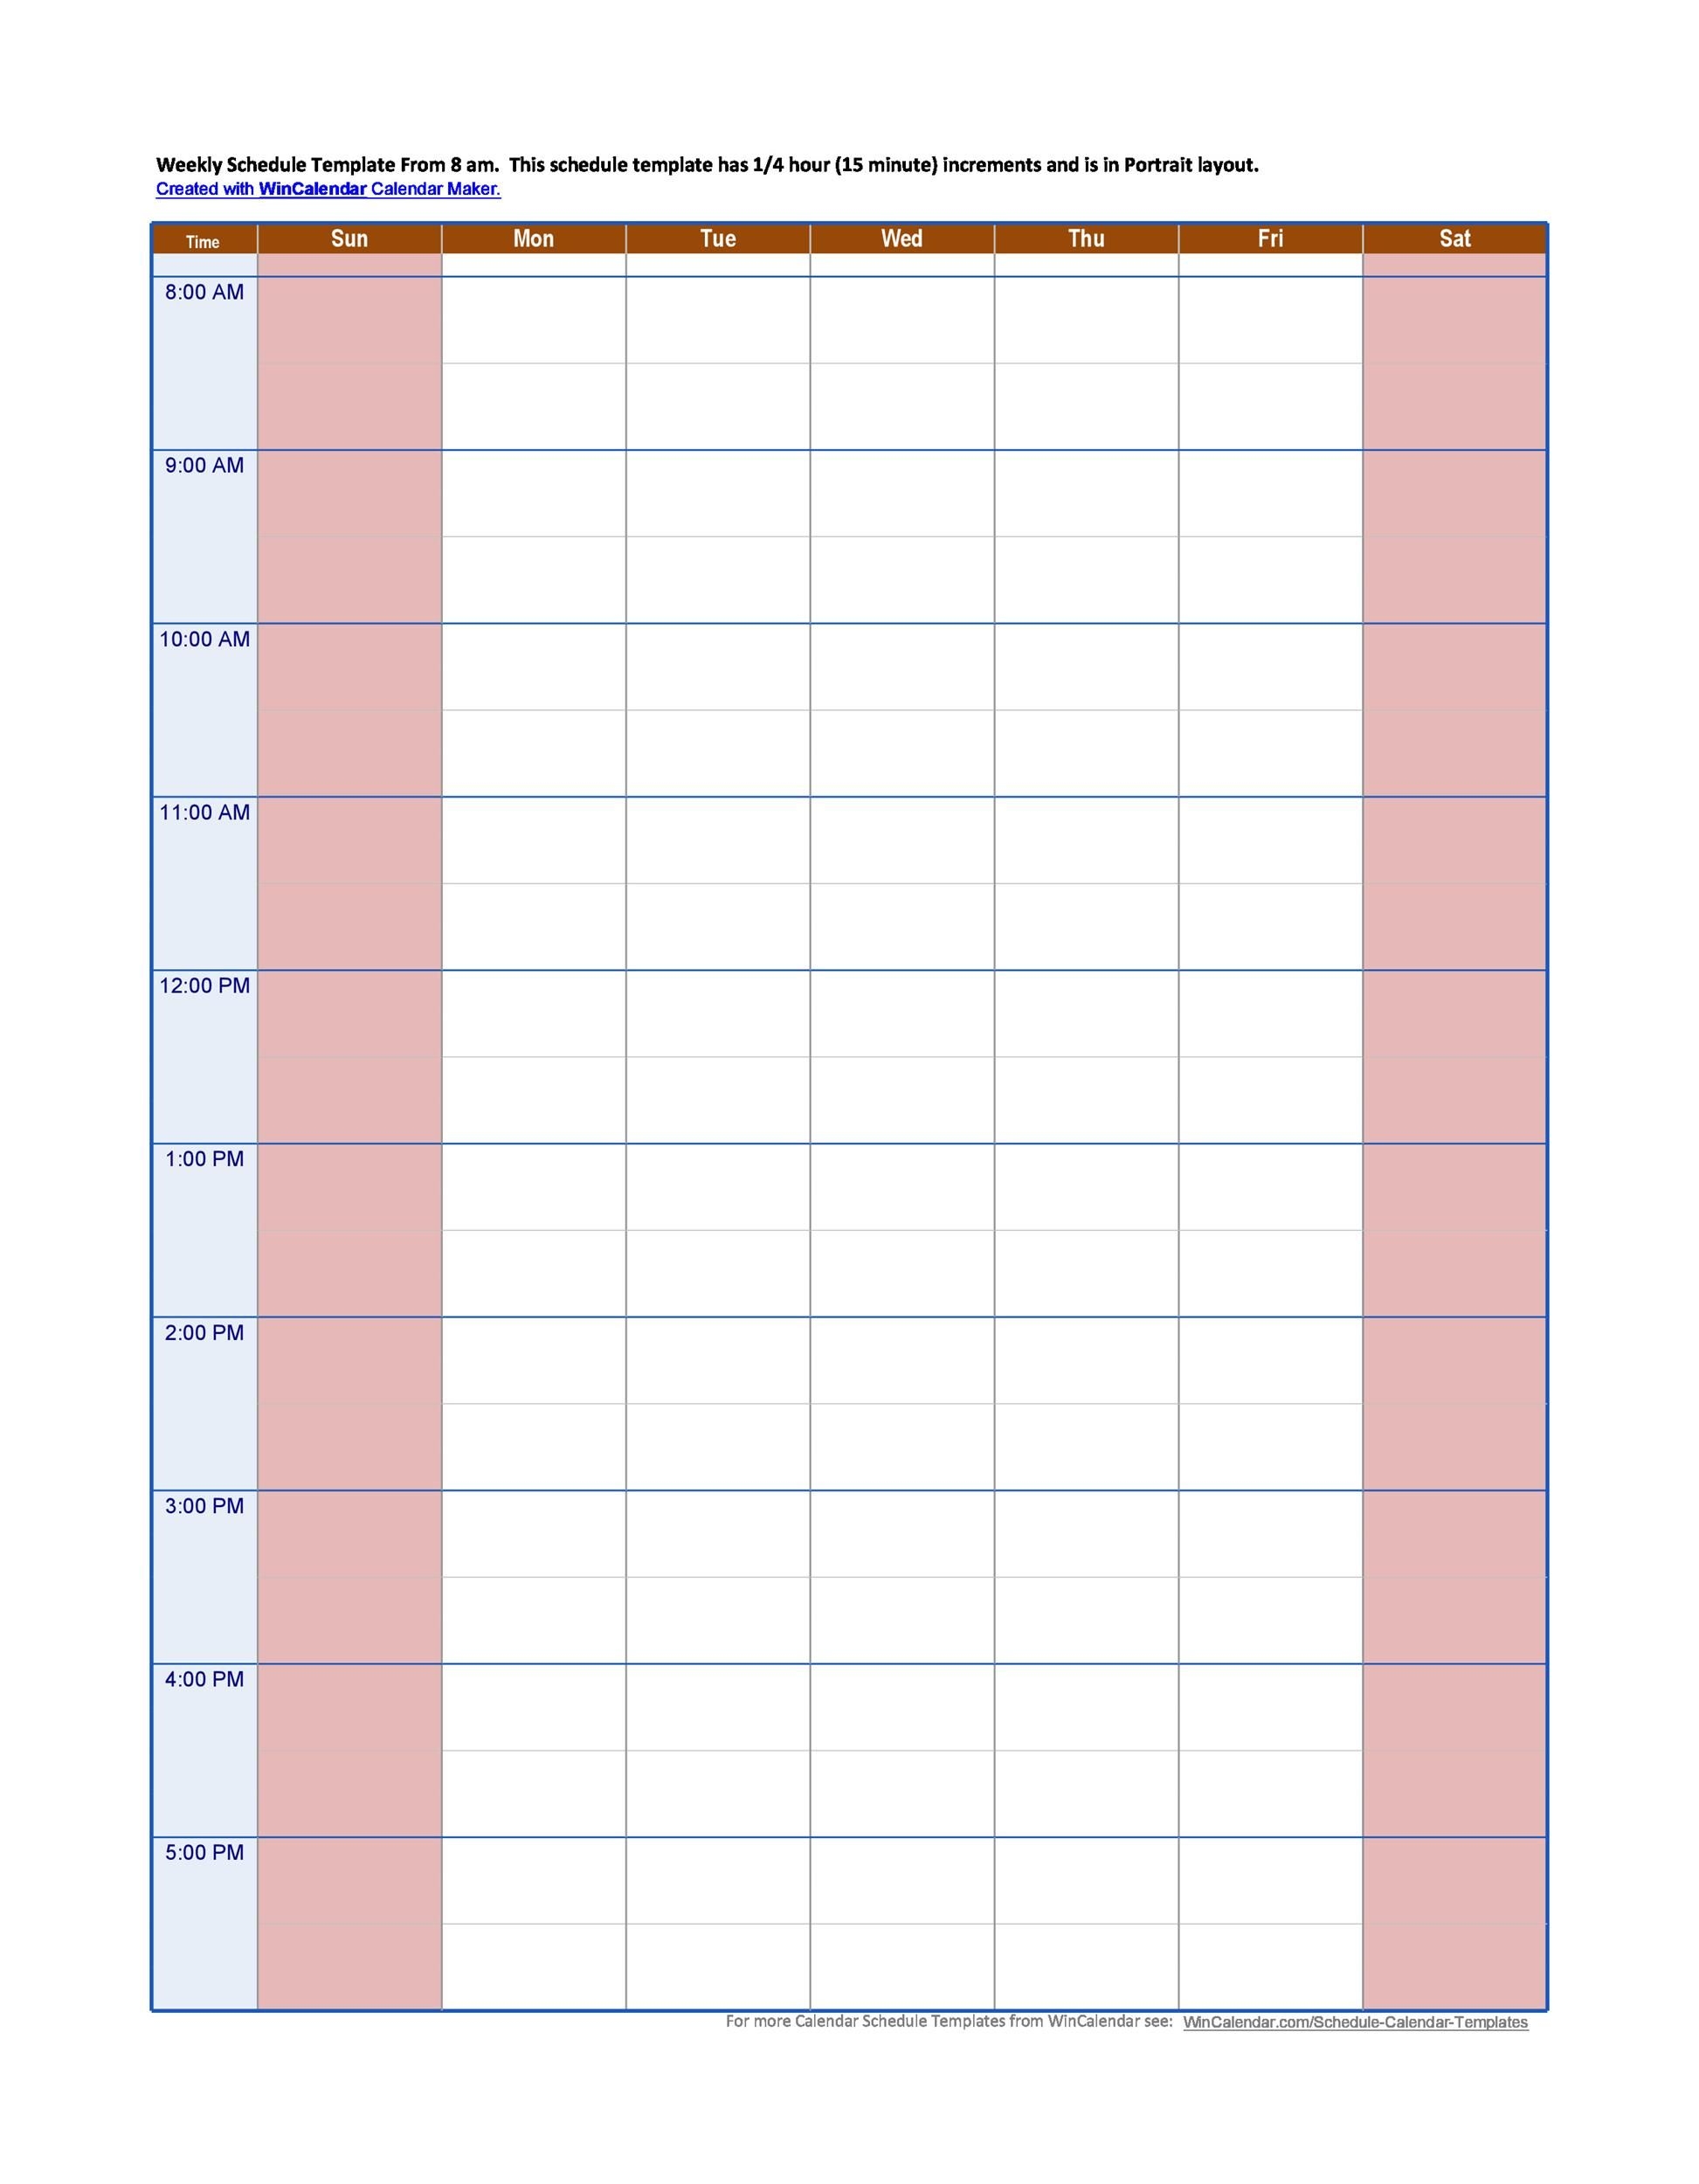 How to Monthly Calendar With Hourly Time Slots Get Your Calendar